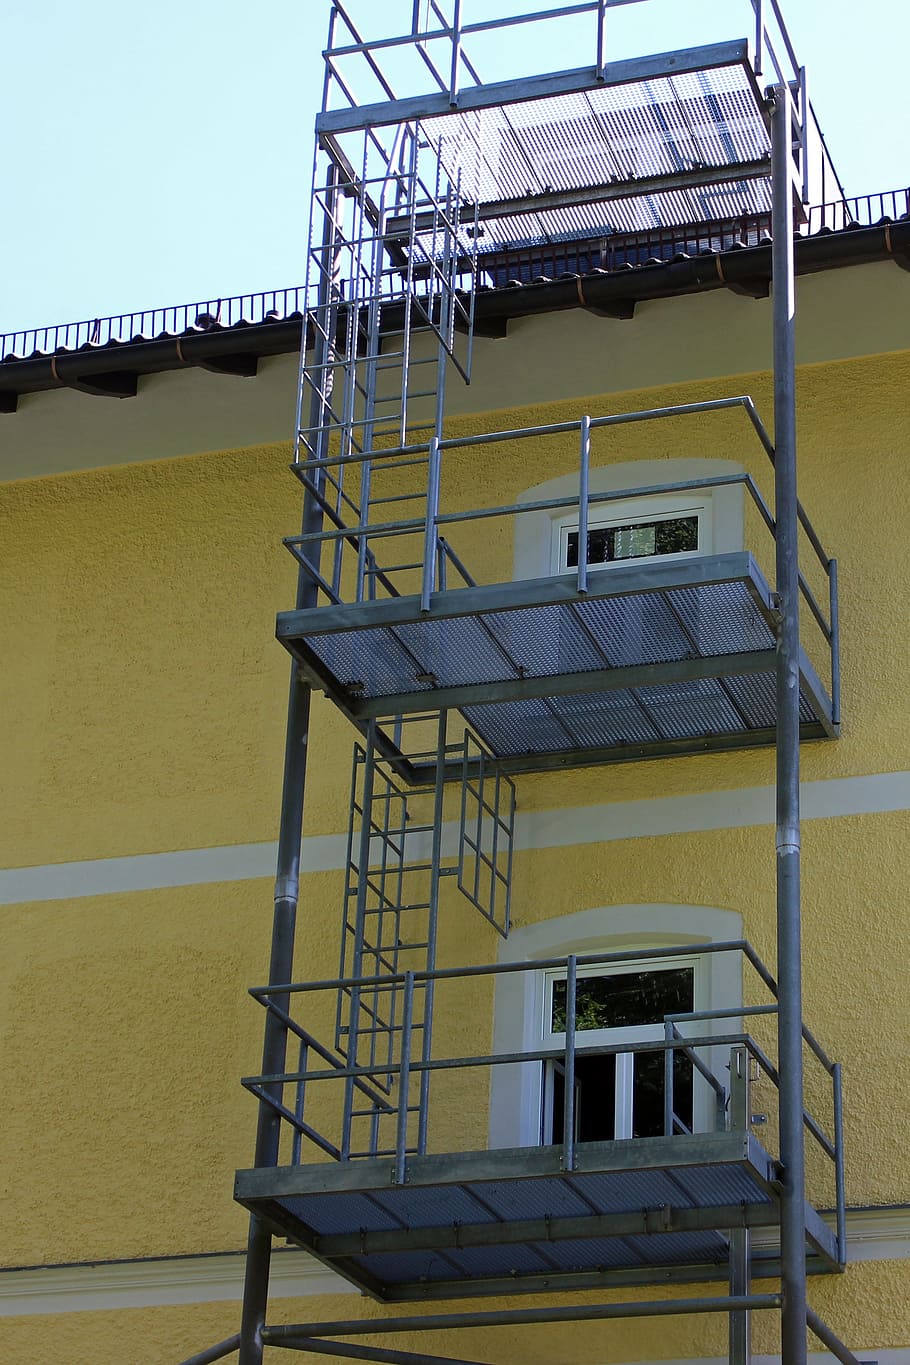 security, fire escape, emergency ladder, head of rescue, exit, emergency, escape route, metal, stairs, grid